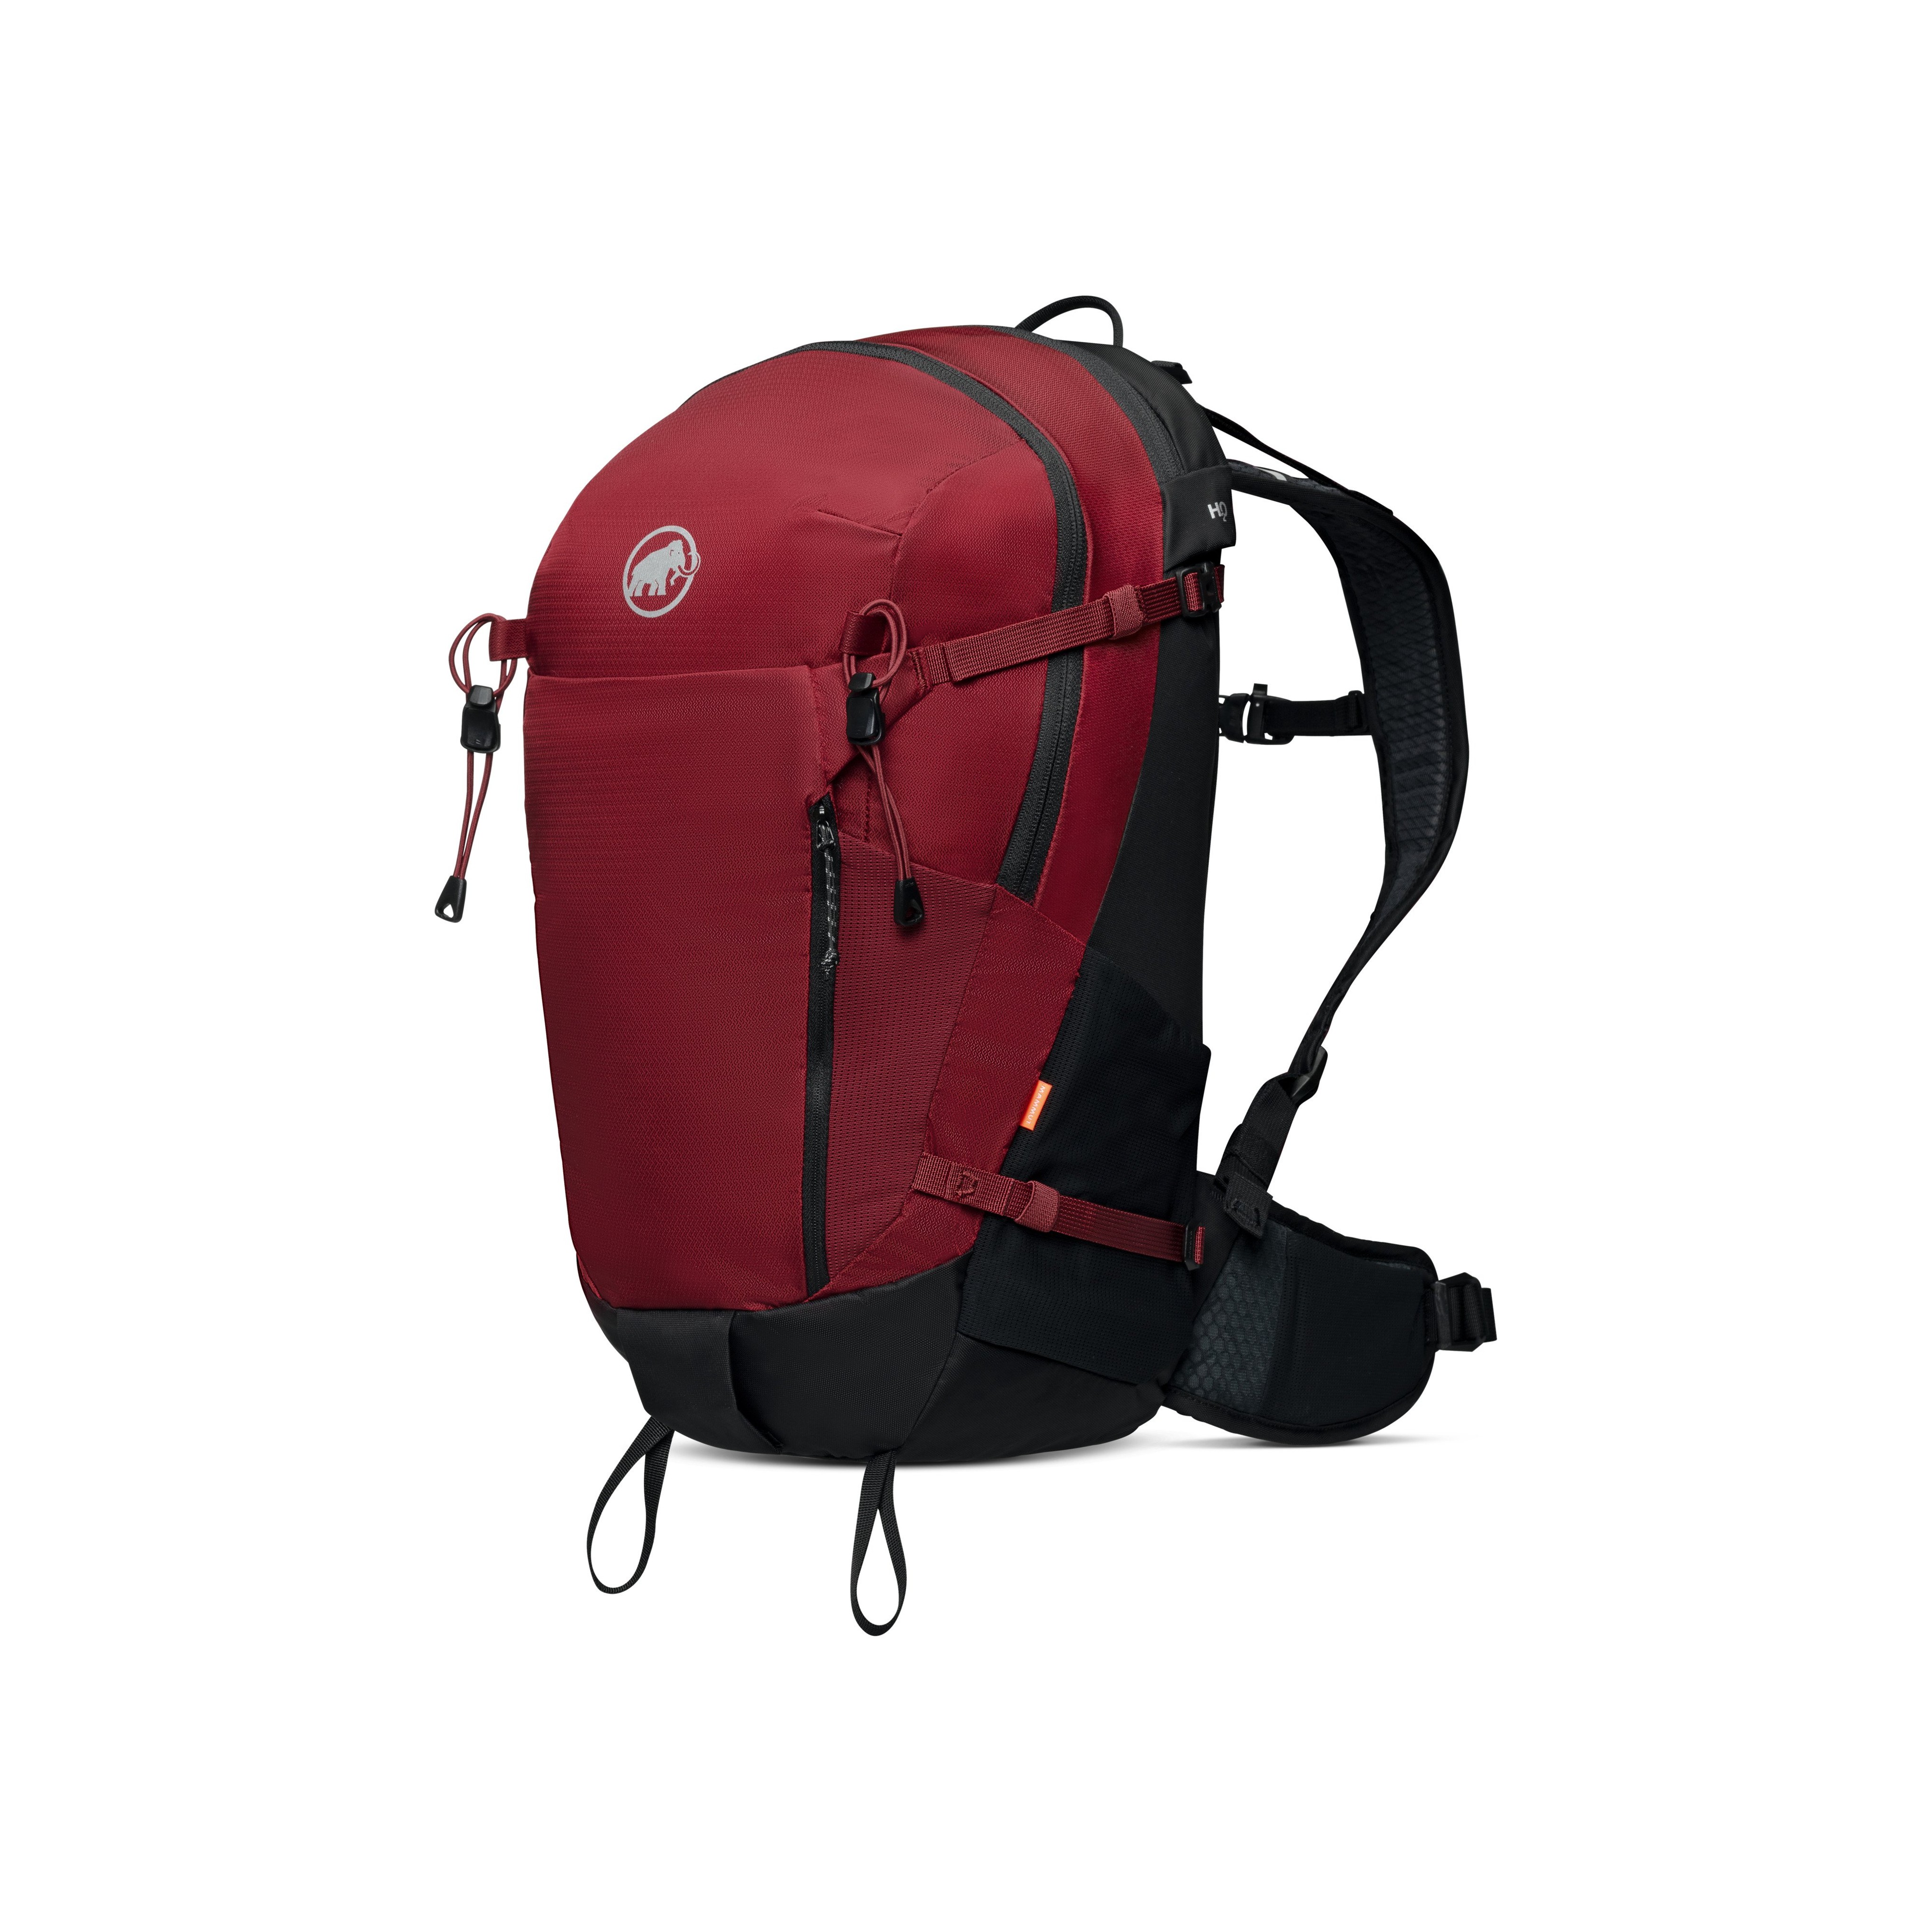 Lithium 25 Women - blood red-black, 25 L product image